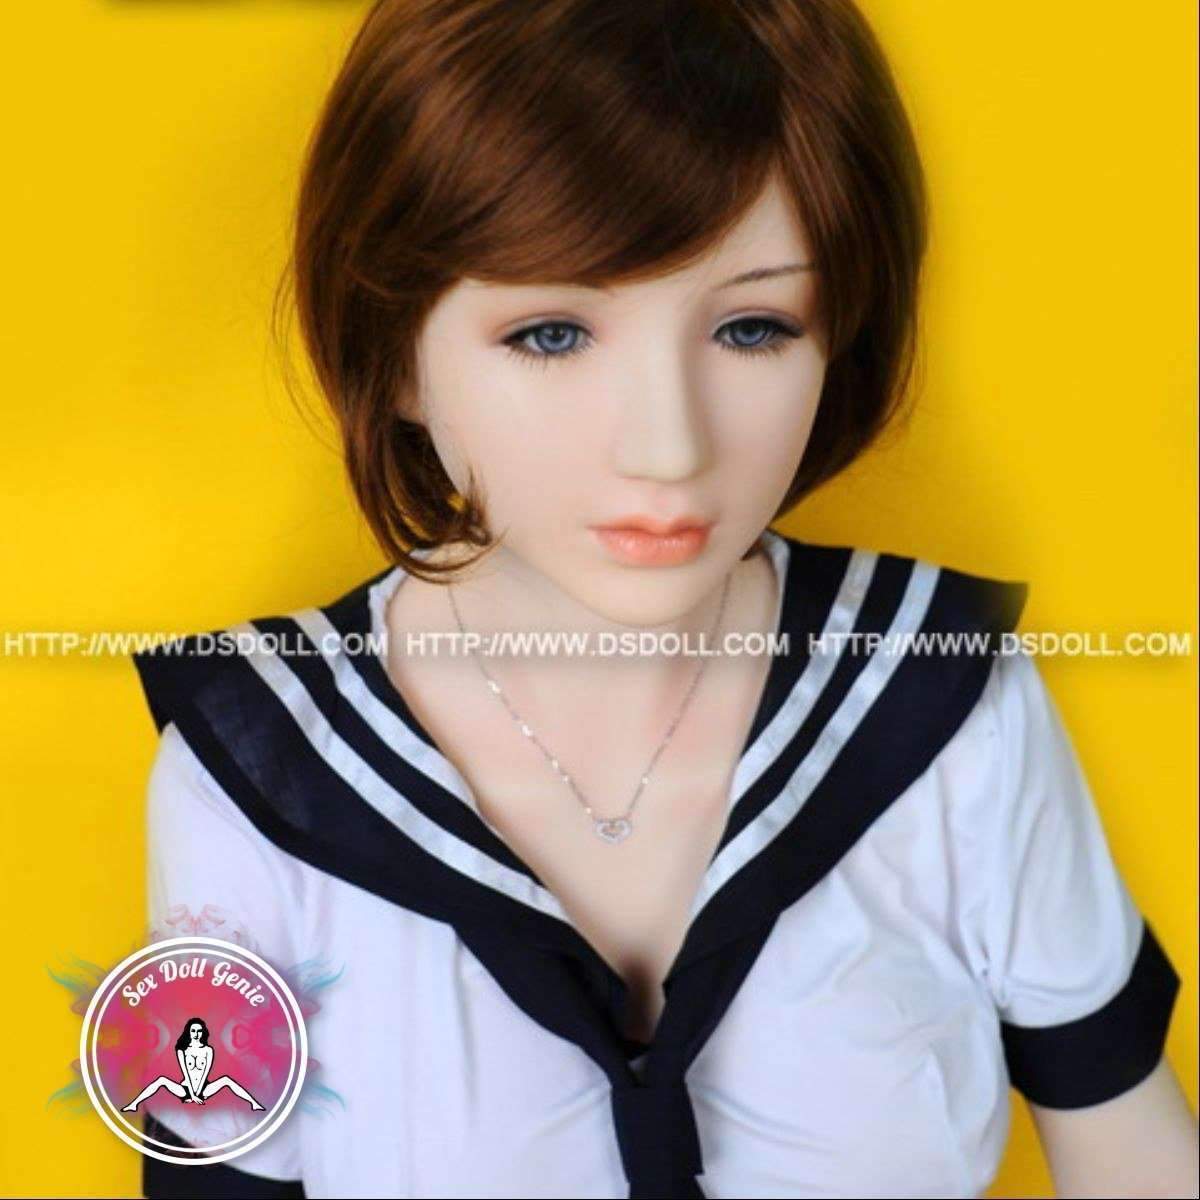 DS Doll - 158cm - Helen Head - Type 1 D Cup Silicone Doll-5